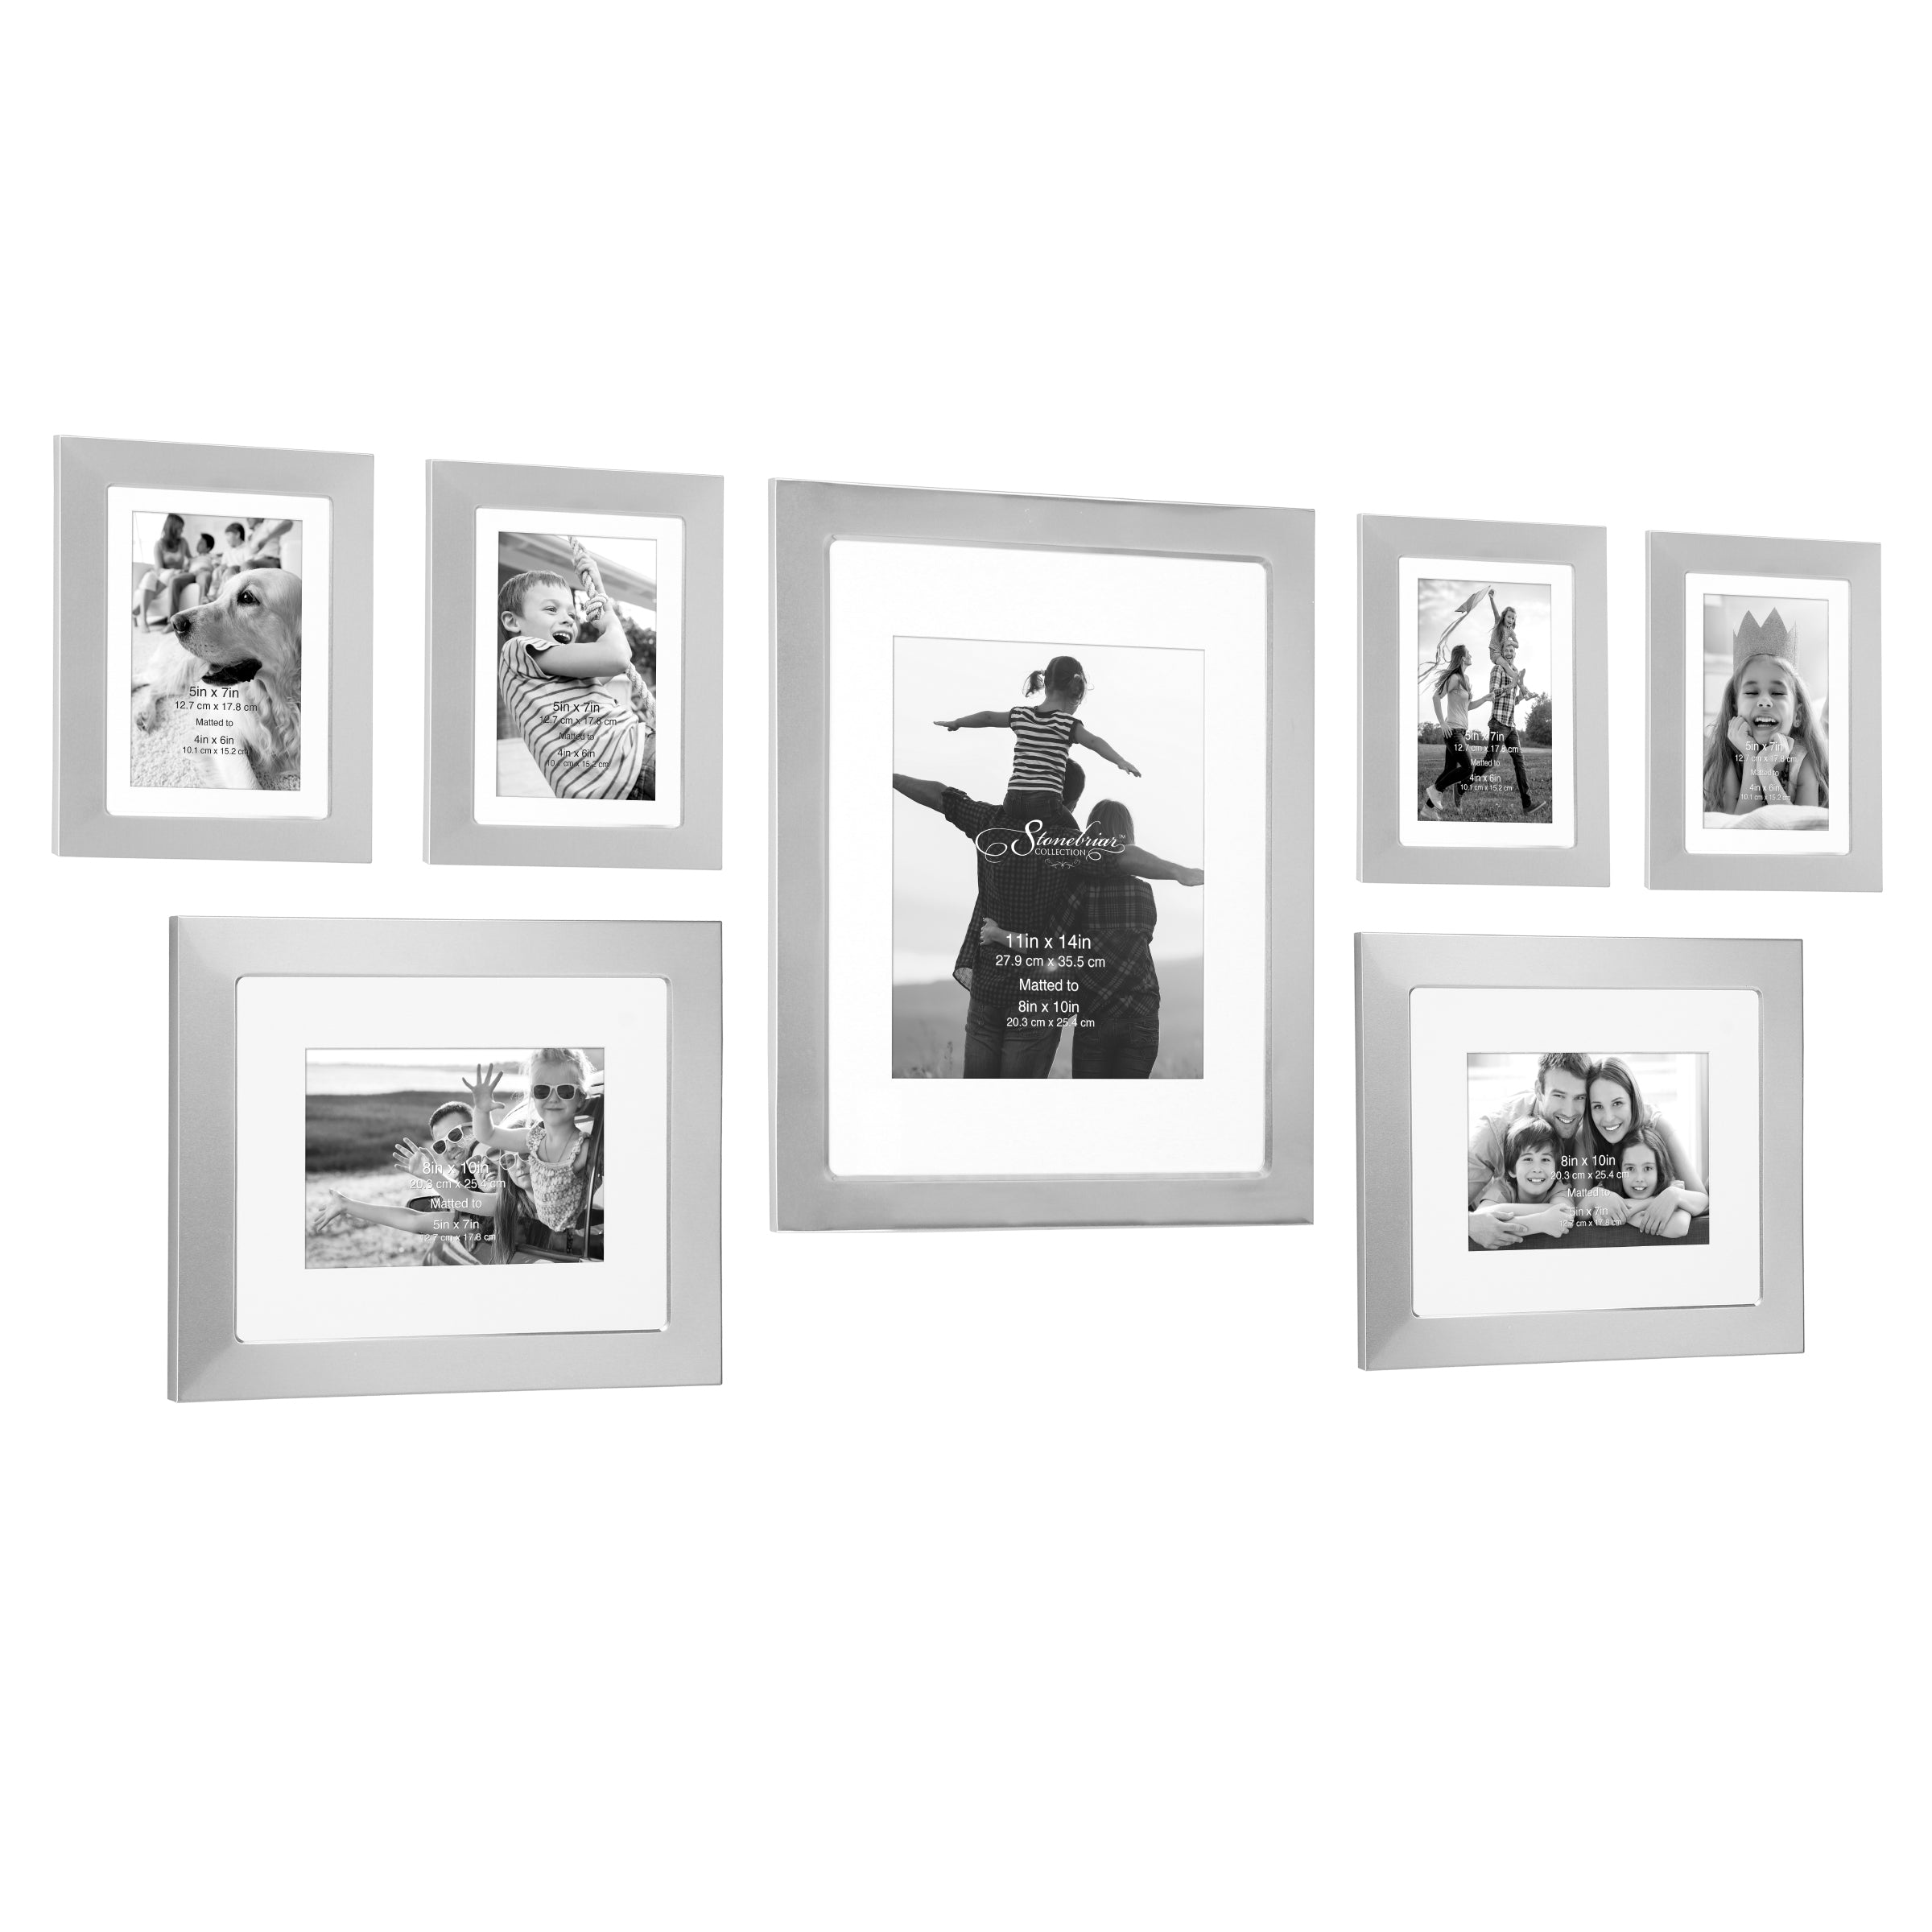 BRIDGEPORT collage frame<br>displays (7) 4x6 photos - Picture Frames, Photo  Albums, Personalized and Engraved Digital Photo Gifts - SendAFrame